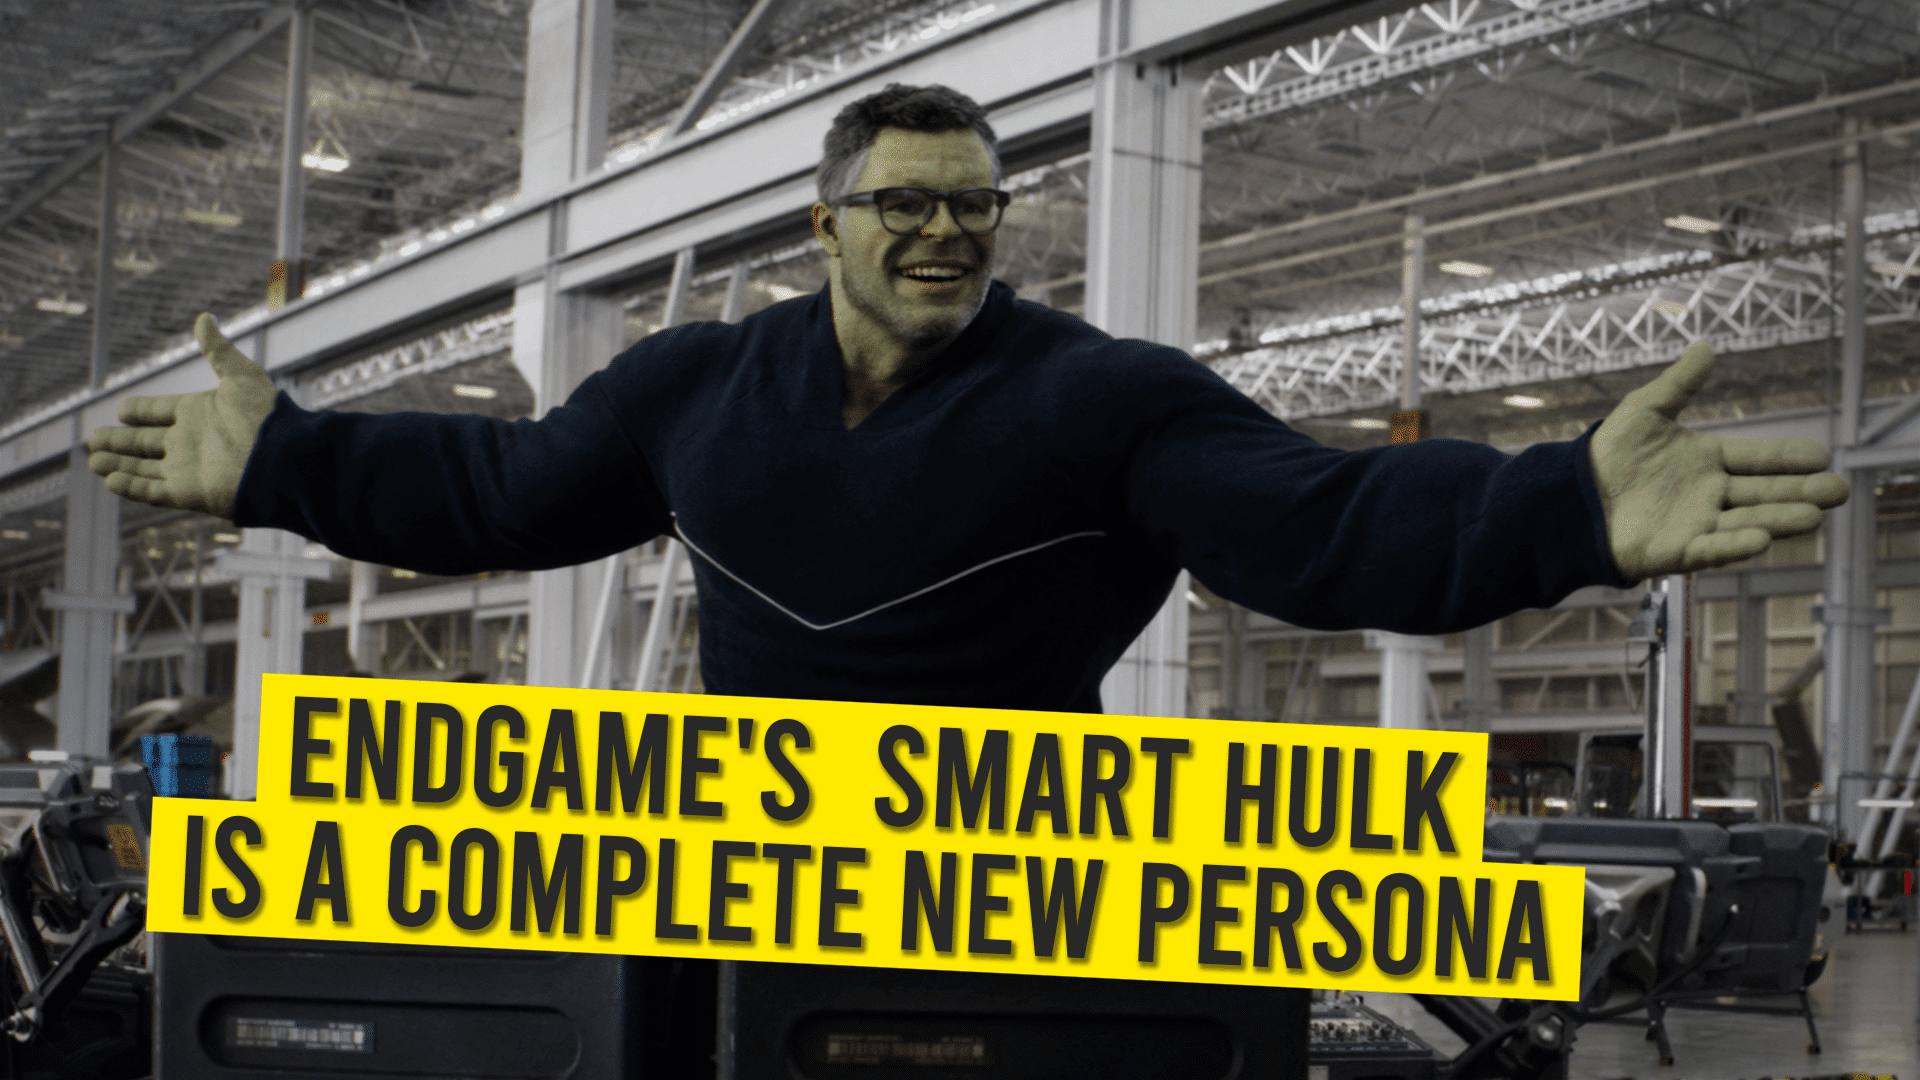 02 Endgames Smart Hulk Is A Complete New Persona